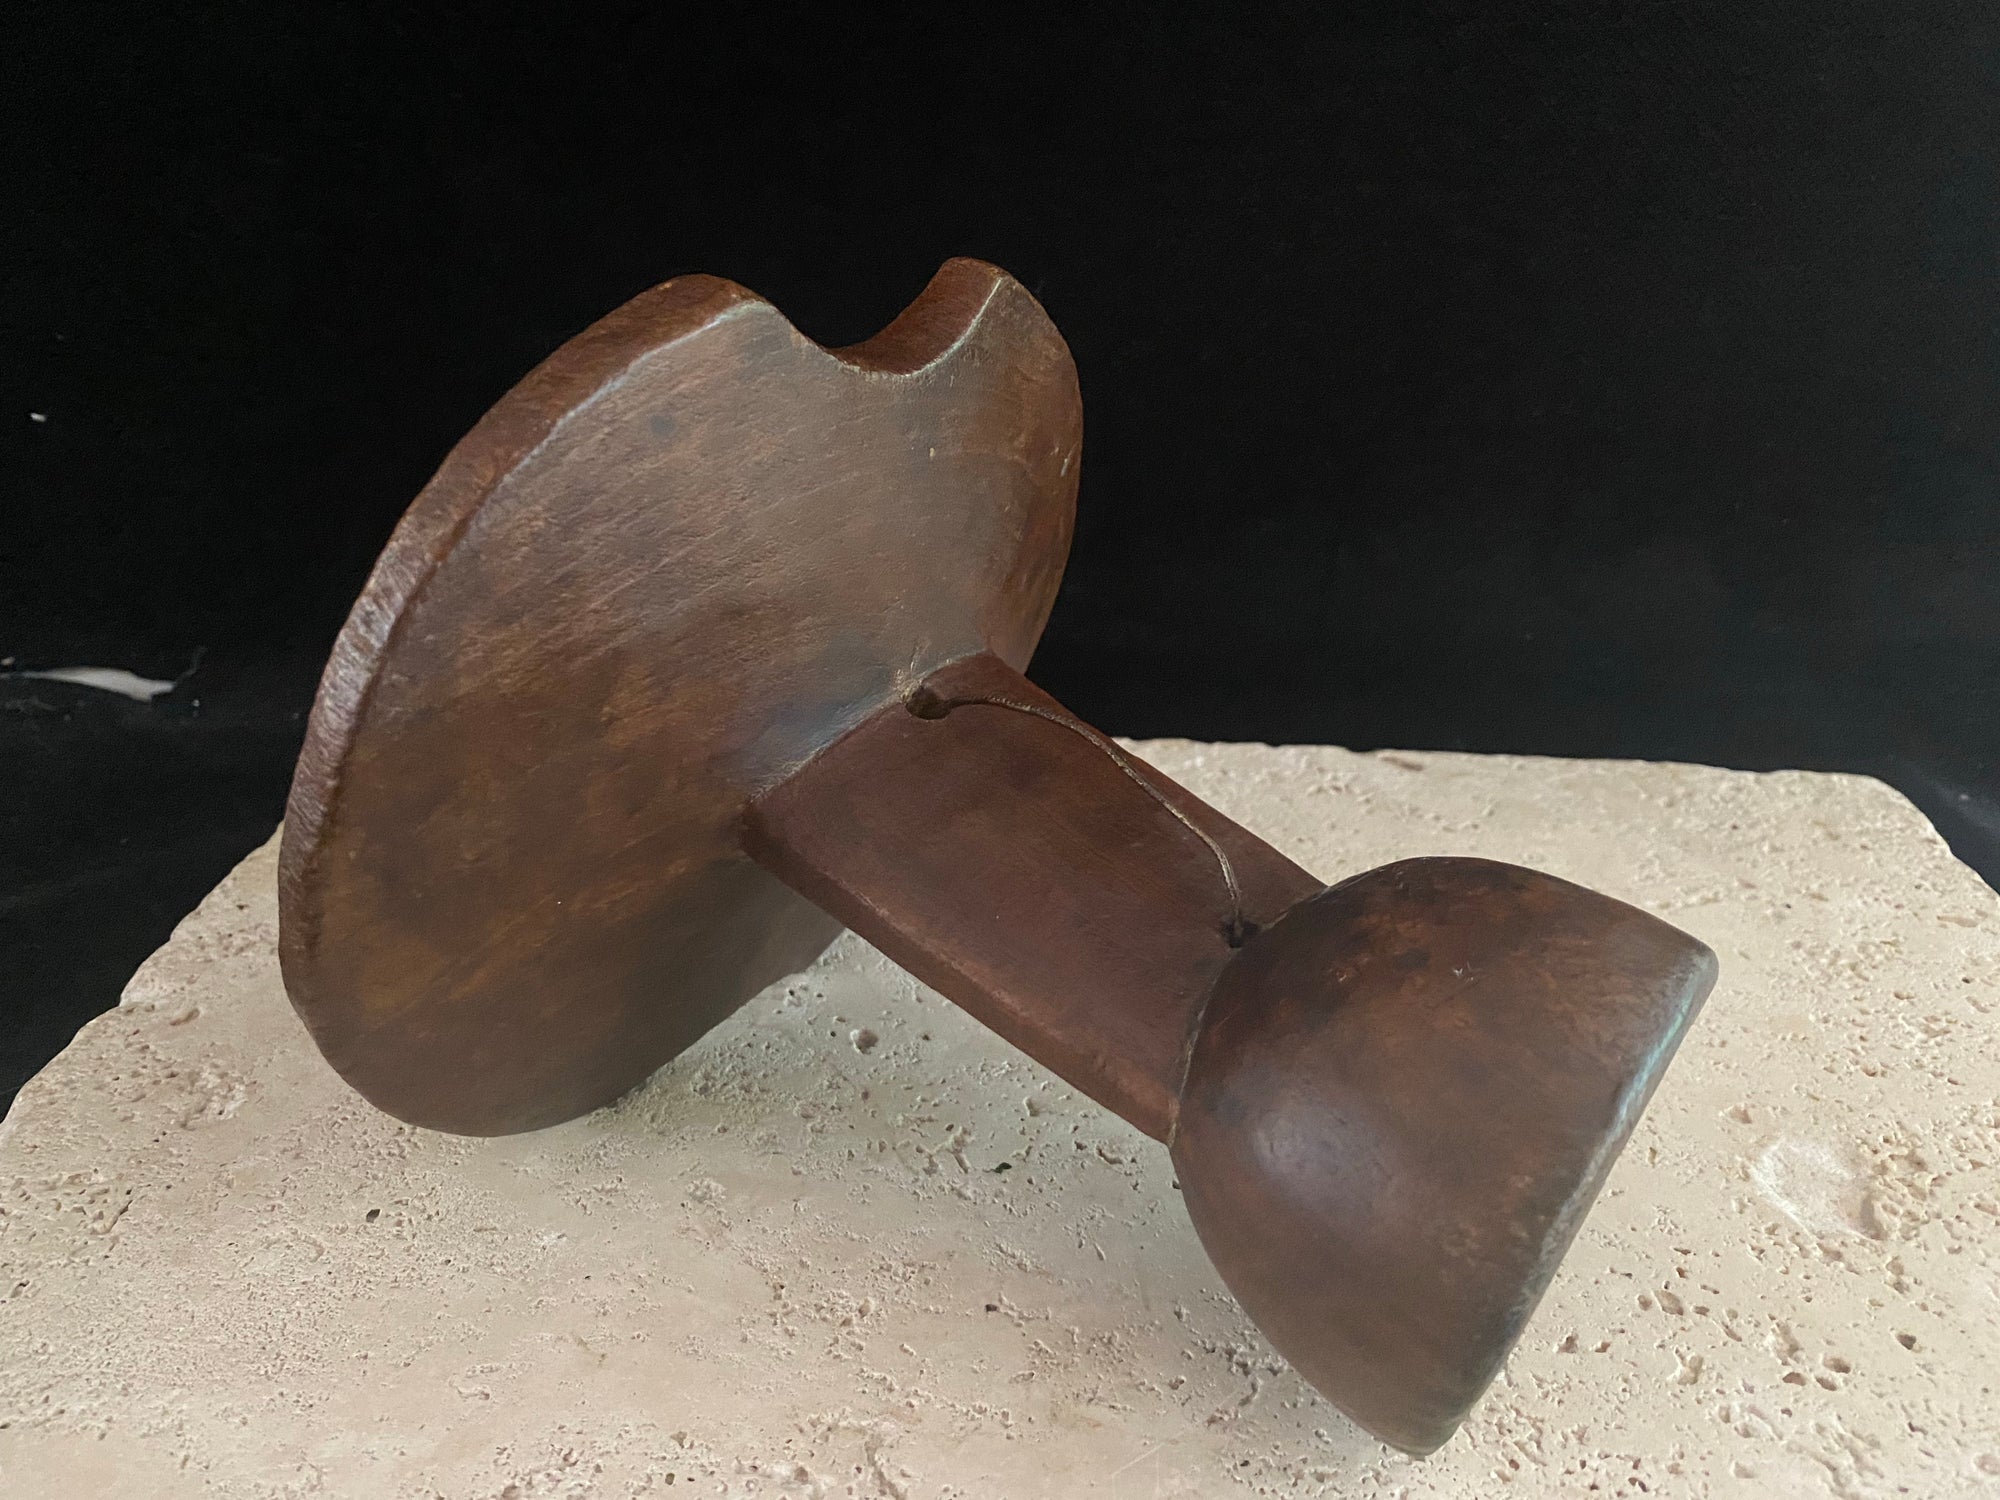 Mursi wood headrest, southern Ethiopia.   Carved from a single piece of wood, with cutouts. Vintage, late 20th century, with patina and wear appropriate to its age. A wire handle is attached. 15 cm height